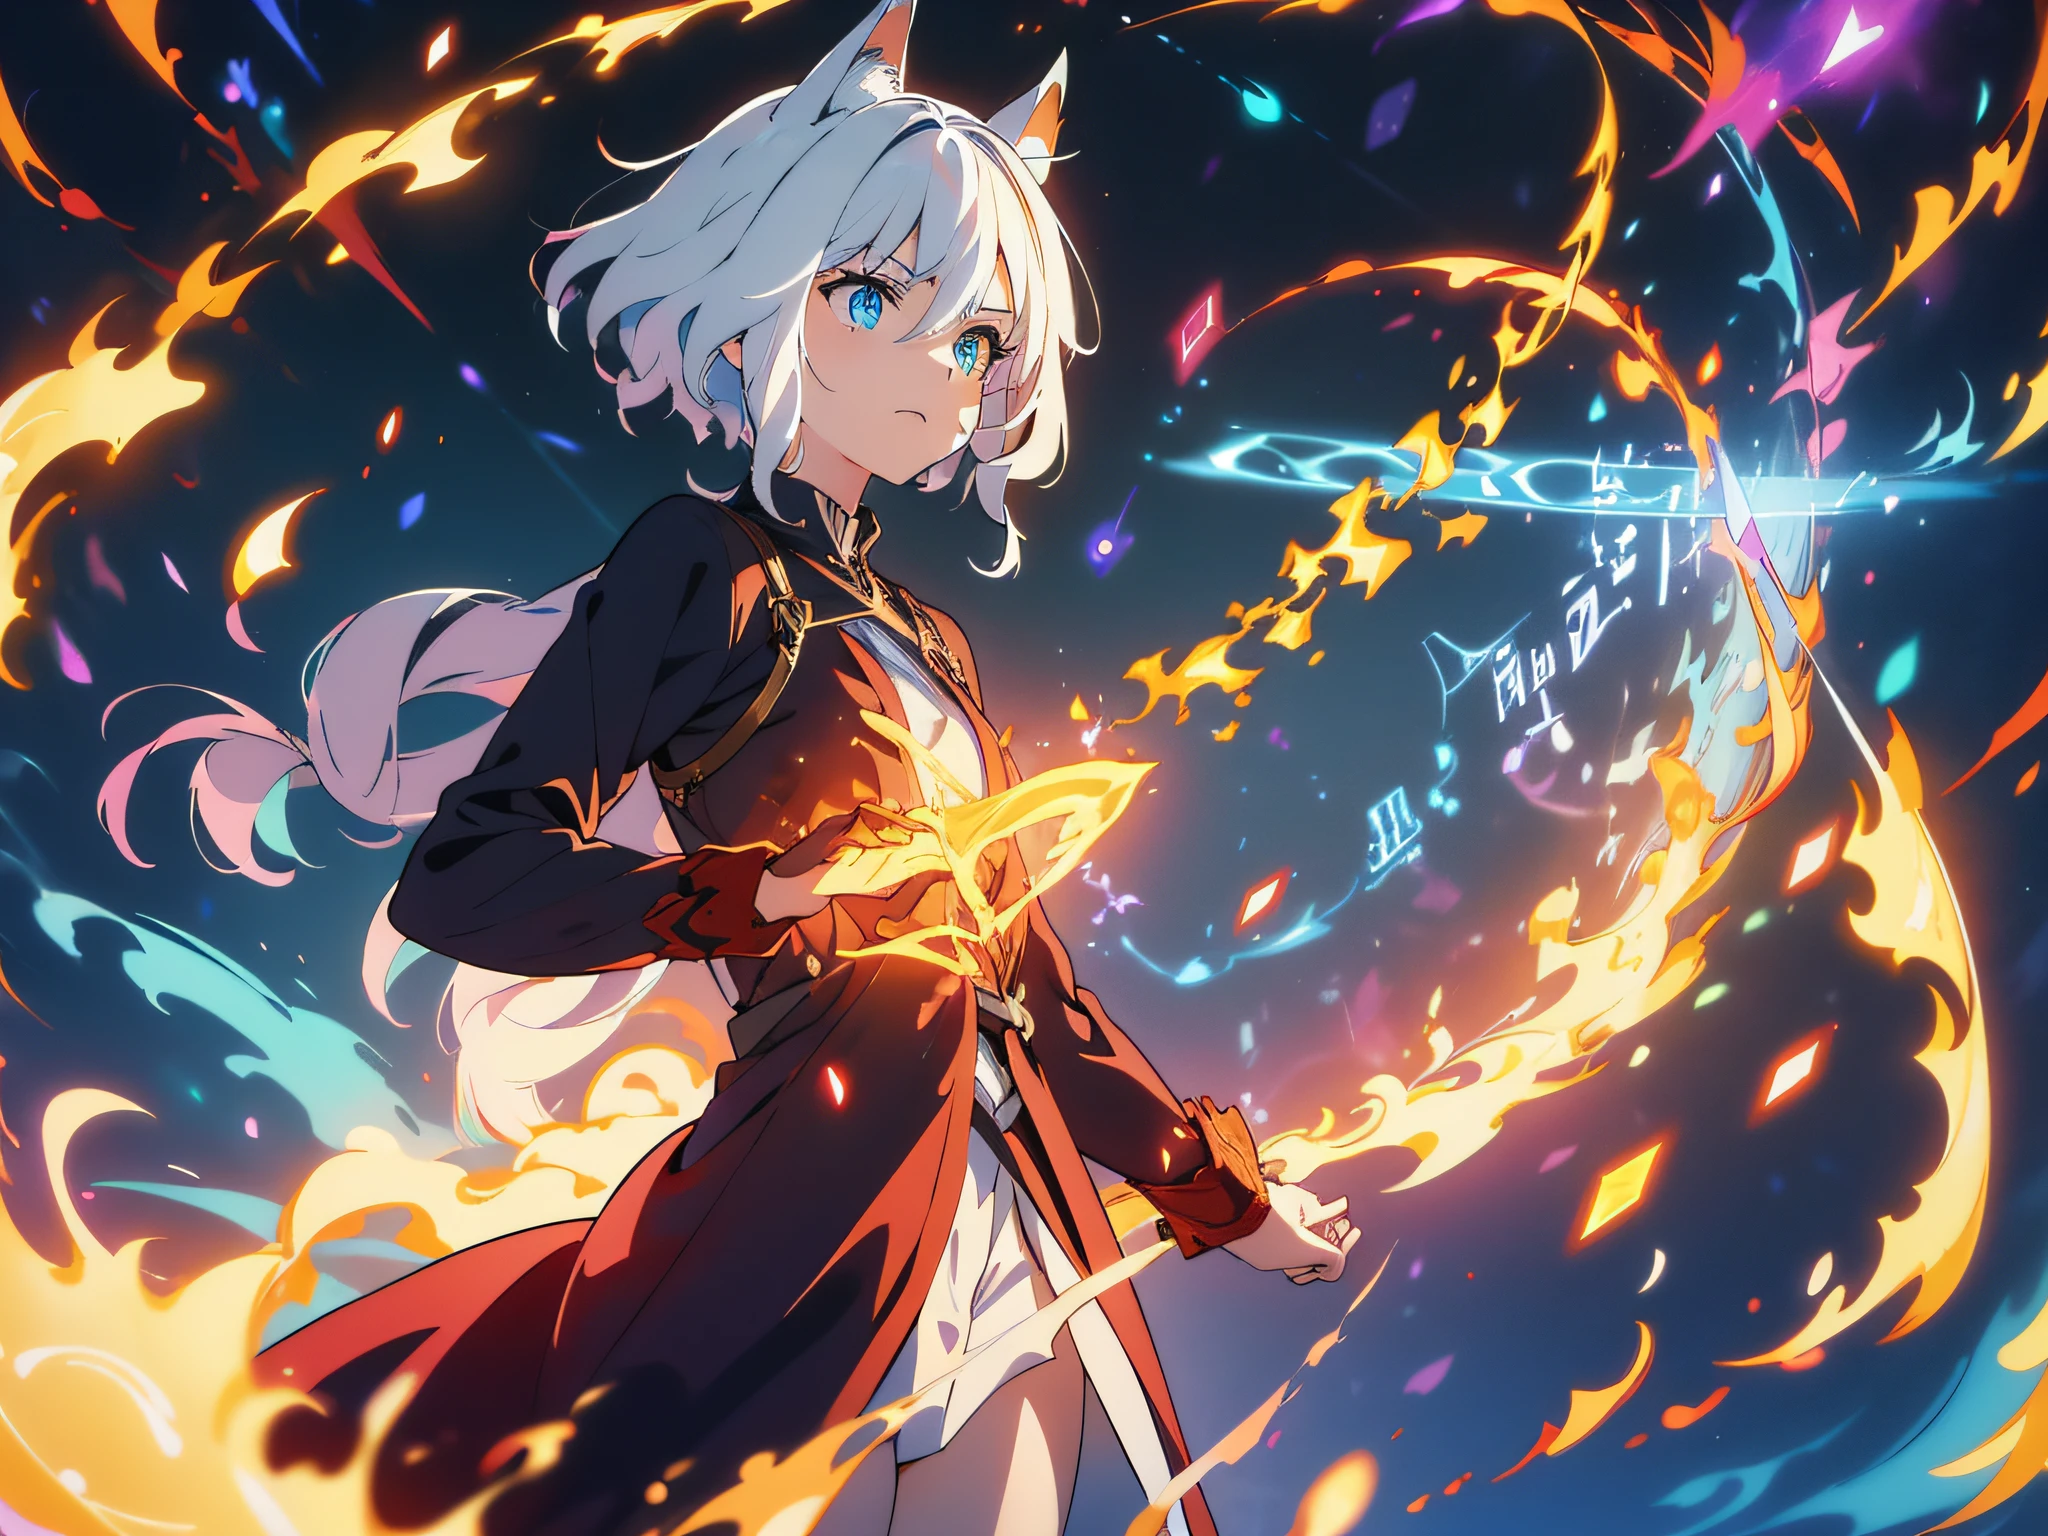 masterpiece, In a world where magic and technology exist side by side, a girl with cat ears (white hair, short hair) sets out on a journey to hone their skills and uncover the secrets of their powers, beautiful eyes finely detailed. The mage must learn to harness the full potential of their abilities and unlock the true potential of magic in the modern age. full body illustration, evil facial expression, holding a sword, she hold sword with flames coming out from her sword.